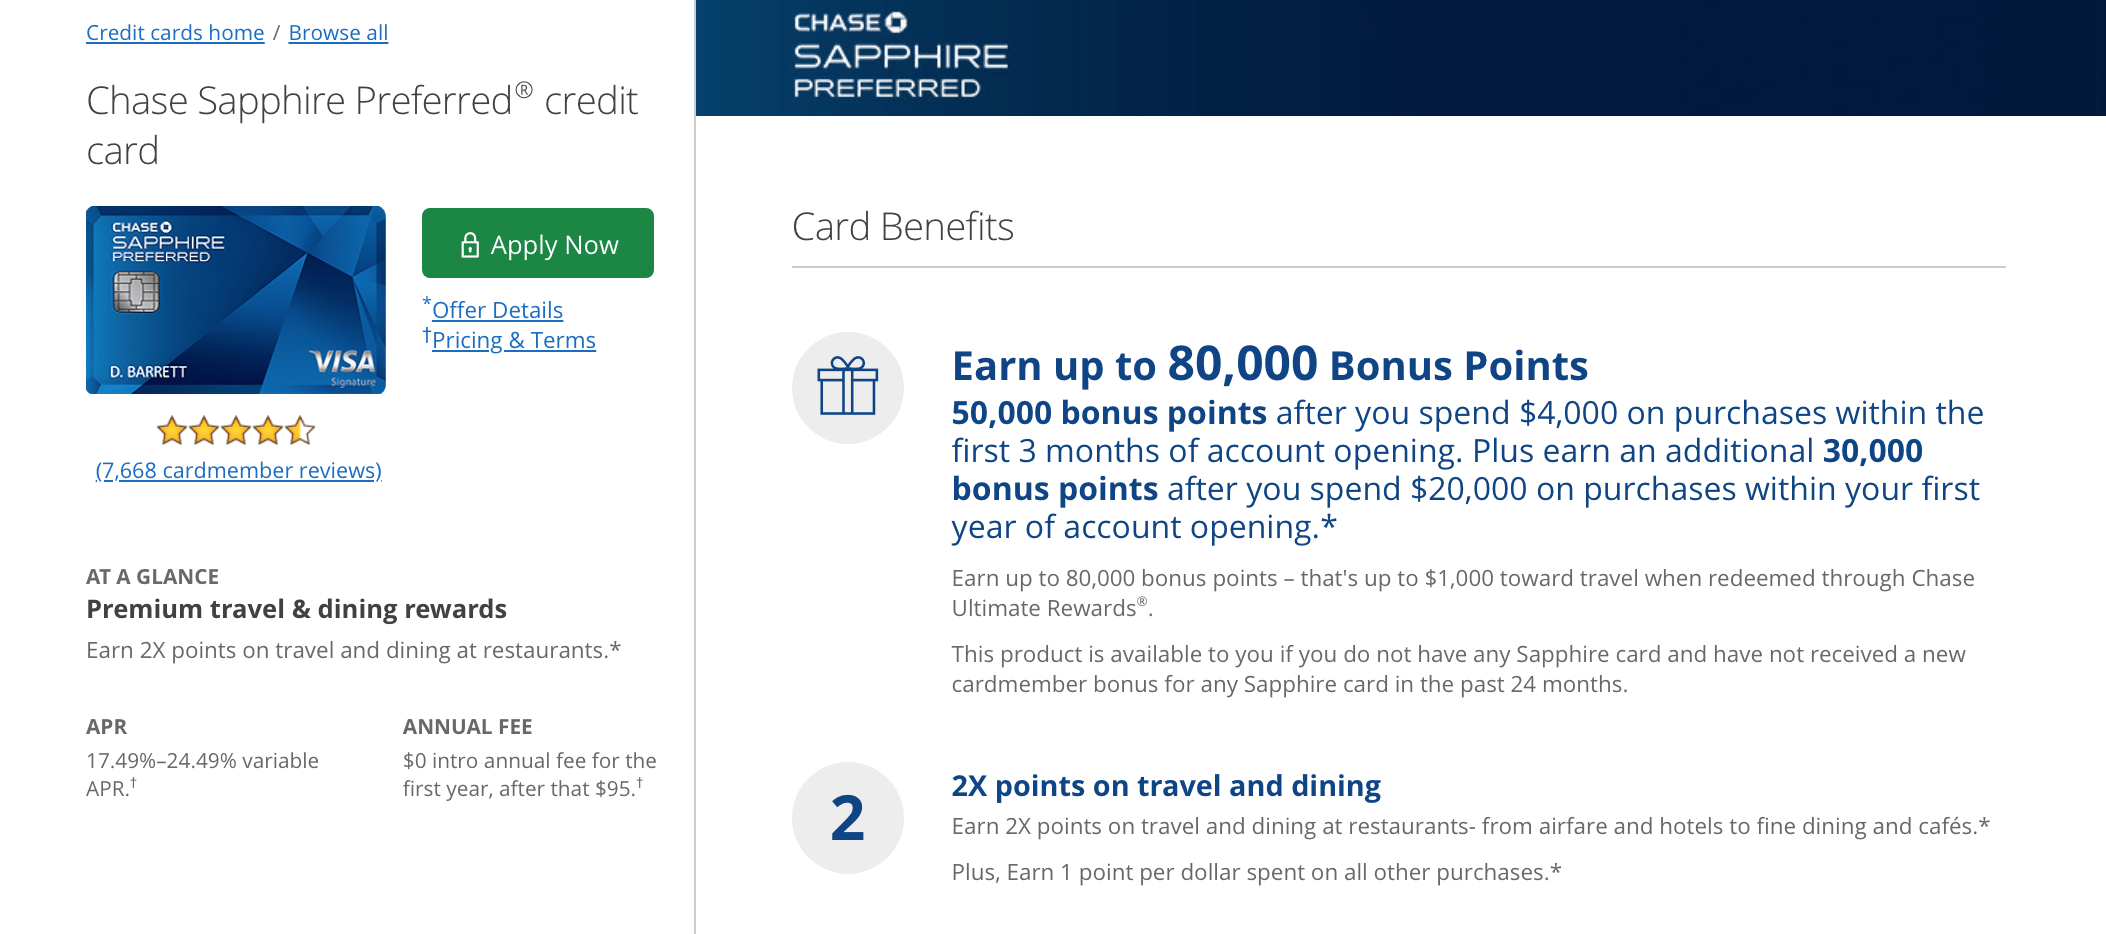 Chase Offering 100,000 Ultimate Rewards Points On A New Mortgage